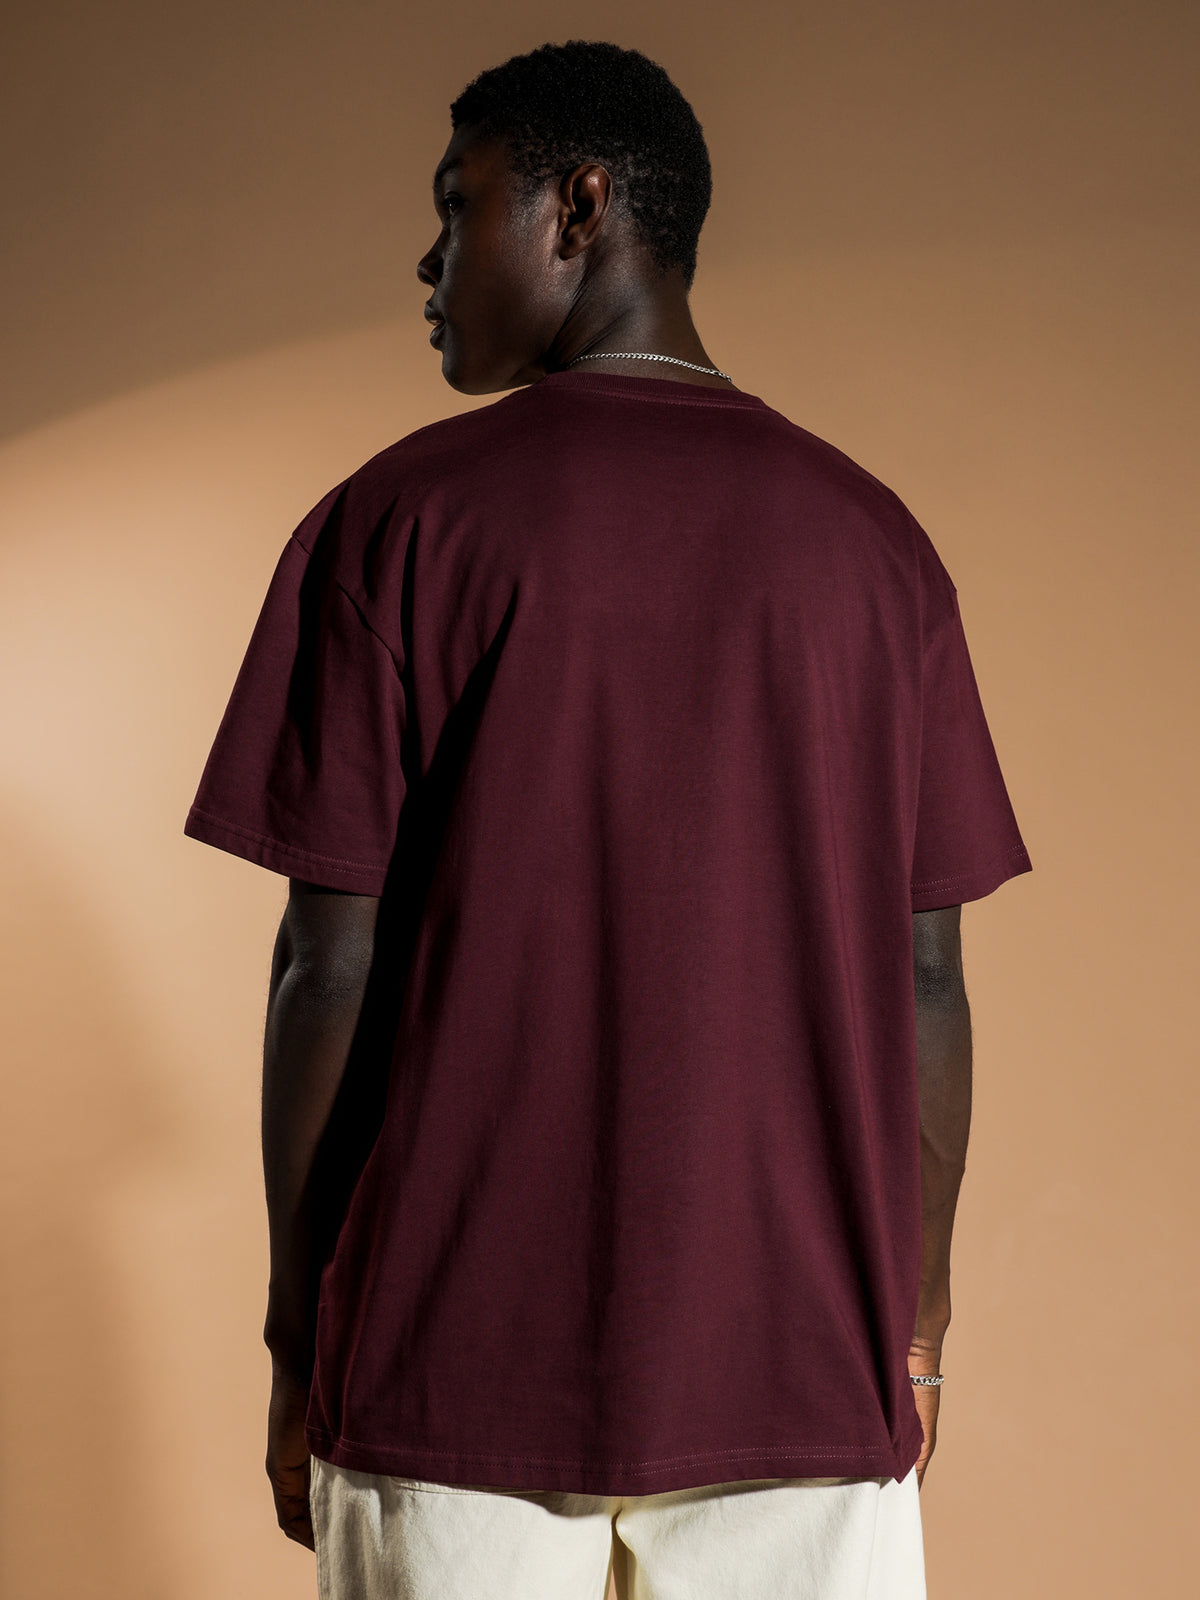 Chase T-Shirt in Burgandy